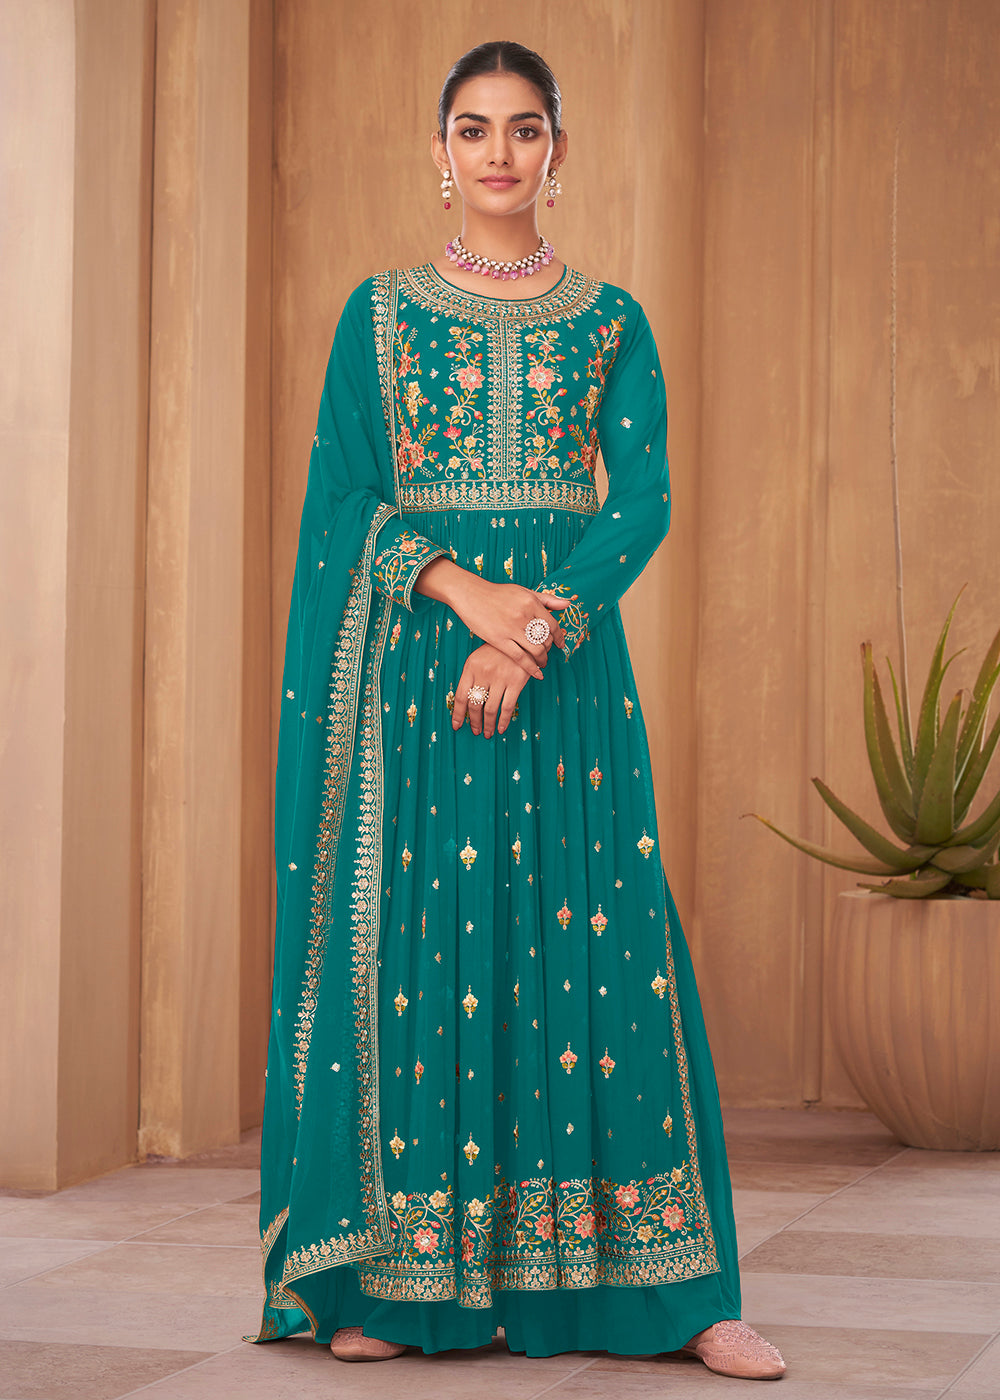 Buy Now Party Style Turquoise Blue Georgette Palazzo Salwar Kurta Online in USA, UK, Canada & Worldwide at Empress Clothing.